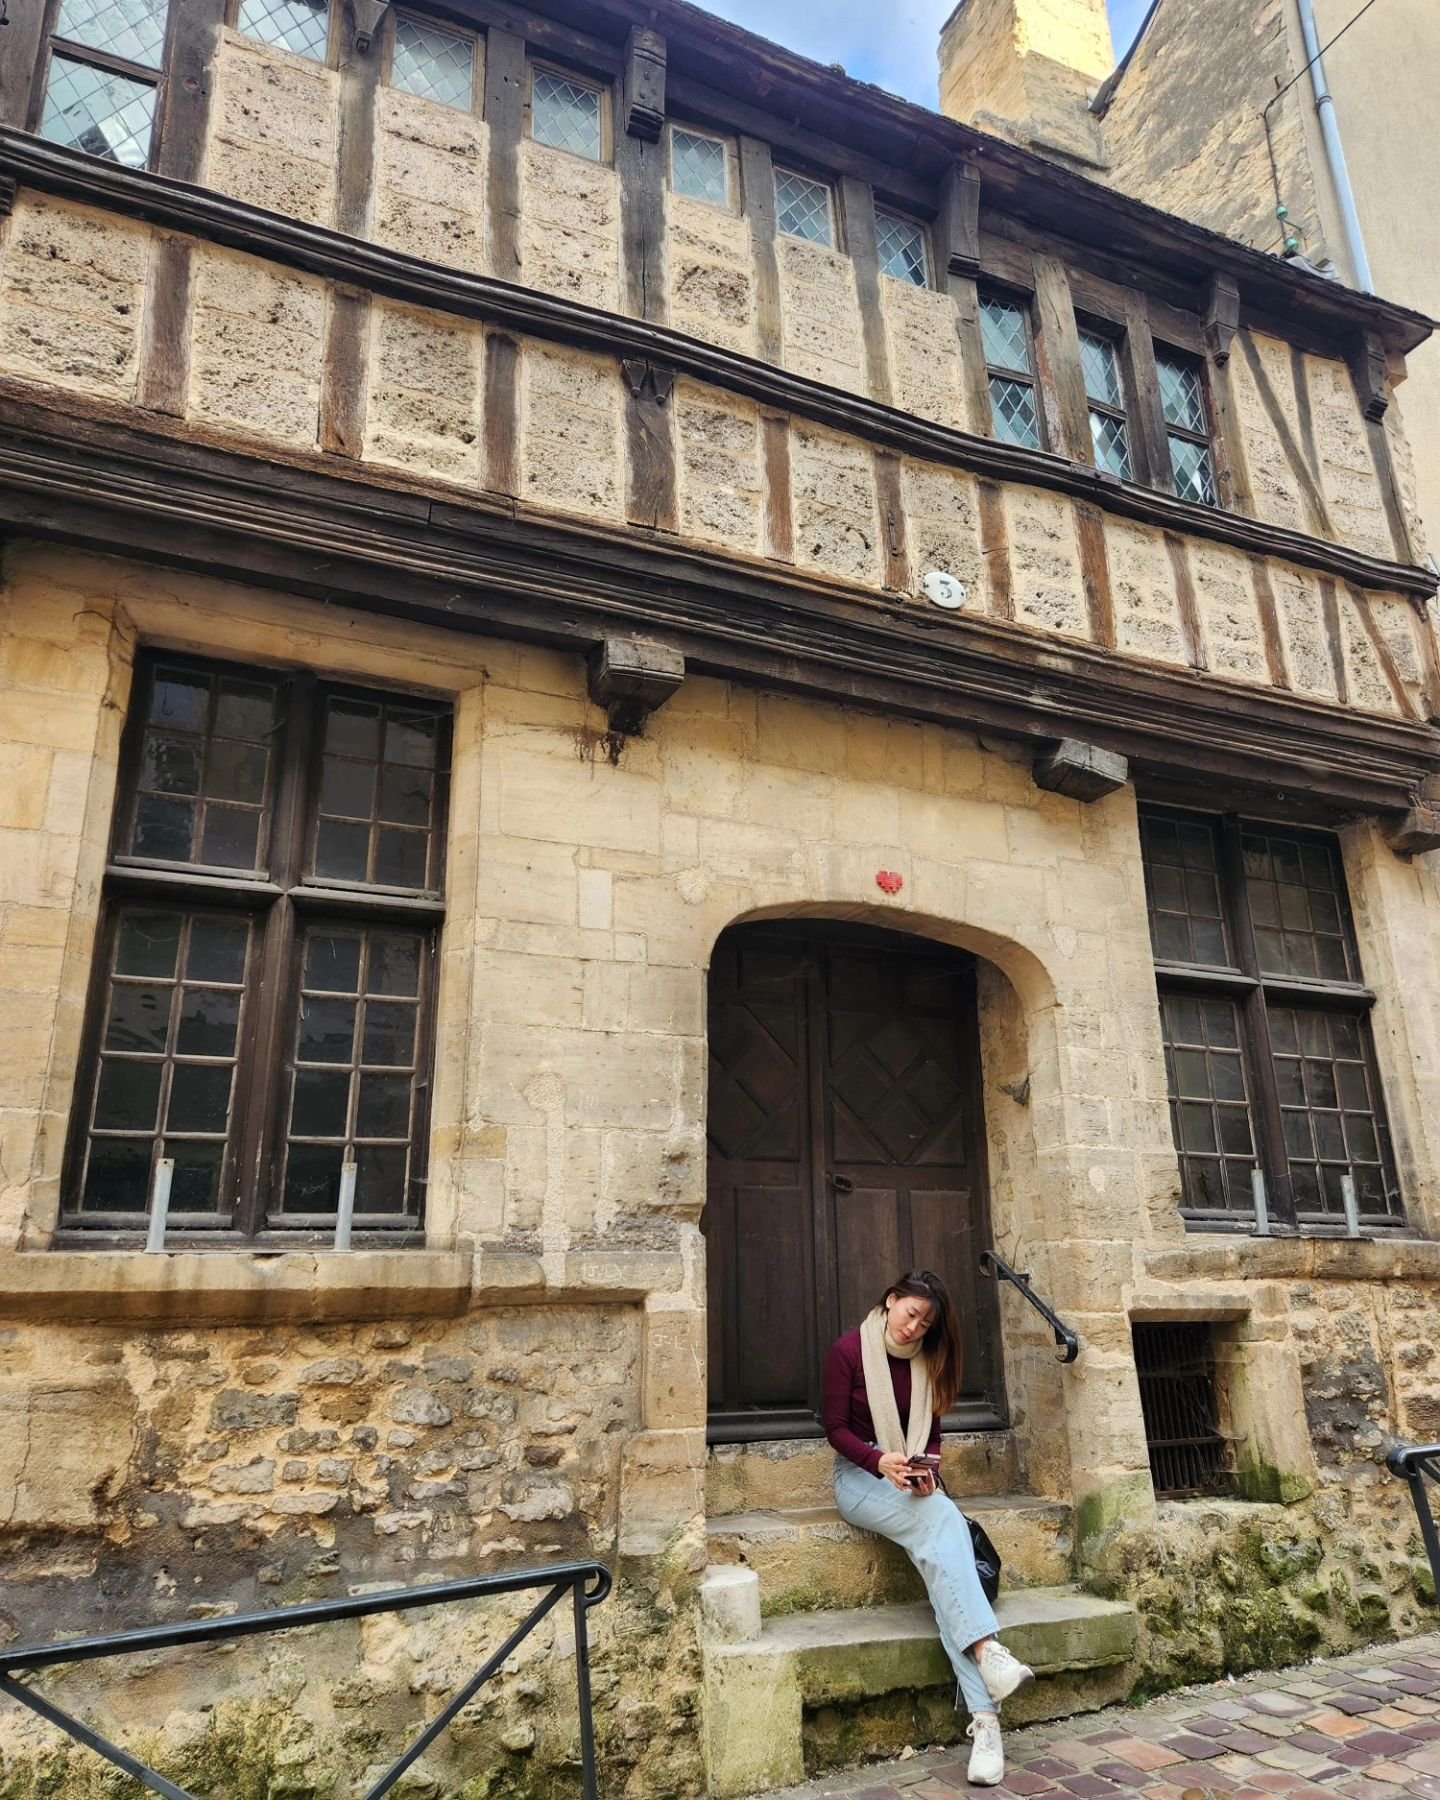 Bayeux, Normandy🇫🇷 Amazing Fresh Food, Kind People and Adobs Animals✨️ AirBnb Video on the 3rd Swipe to see how Daisy the Pug took over our room.
The 🐛insect house was so amusing to me. Scroll to see the landmarks and yummy food! 
If you are plann